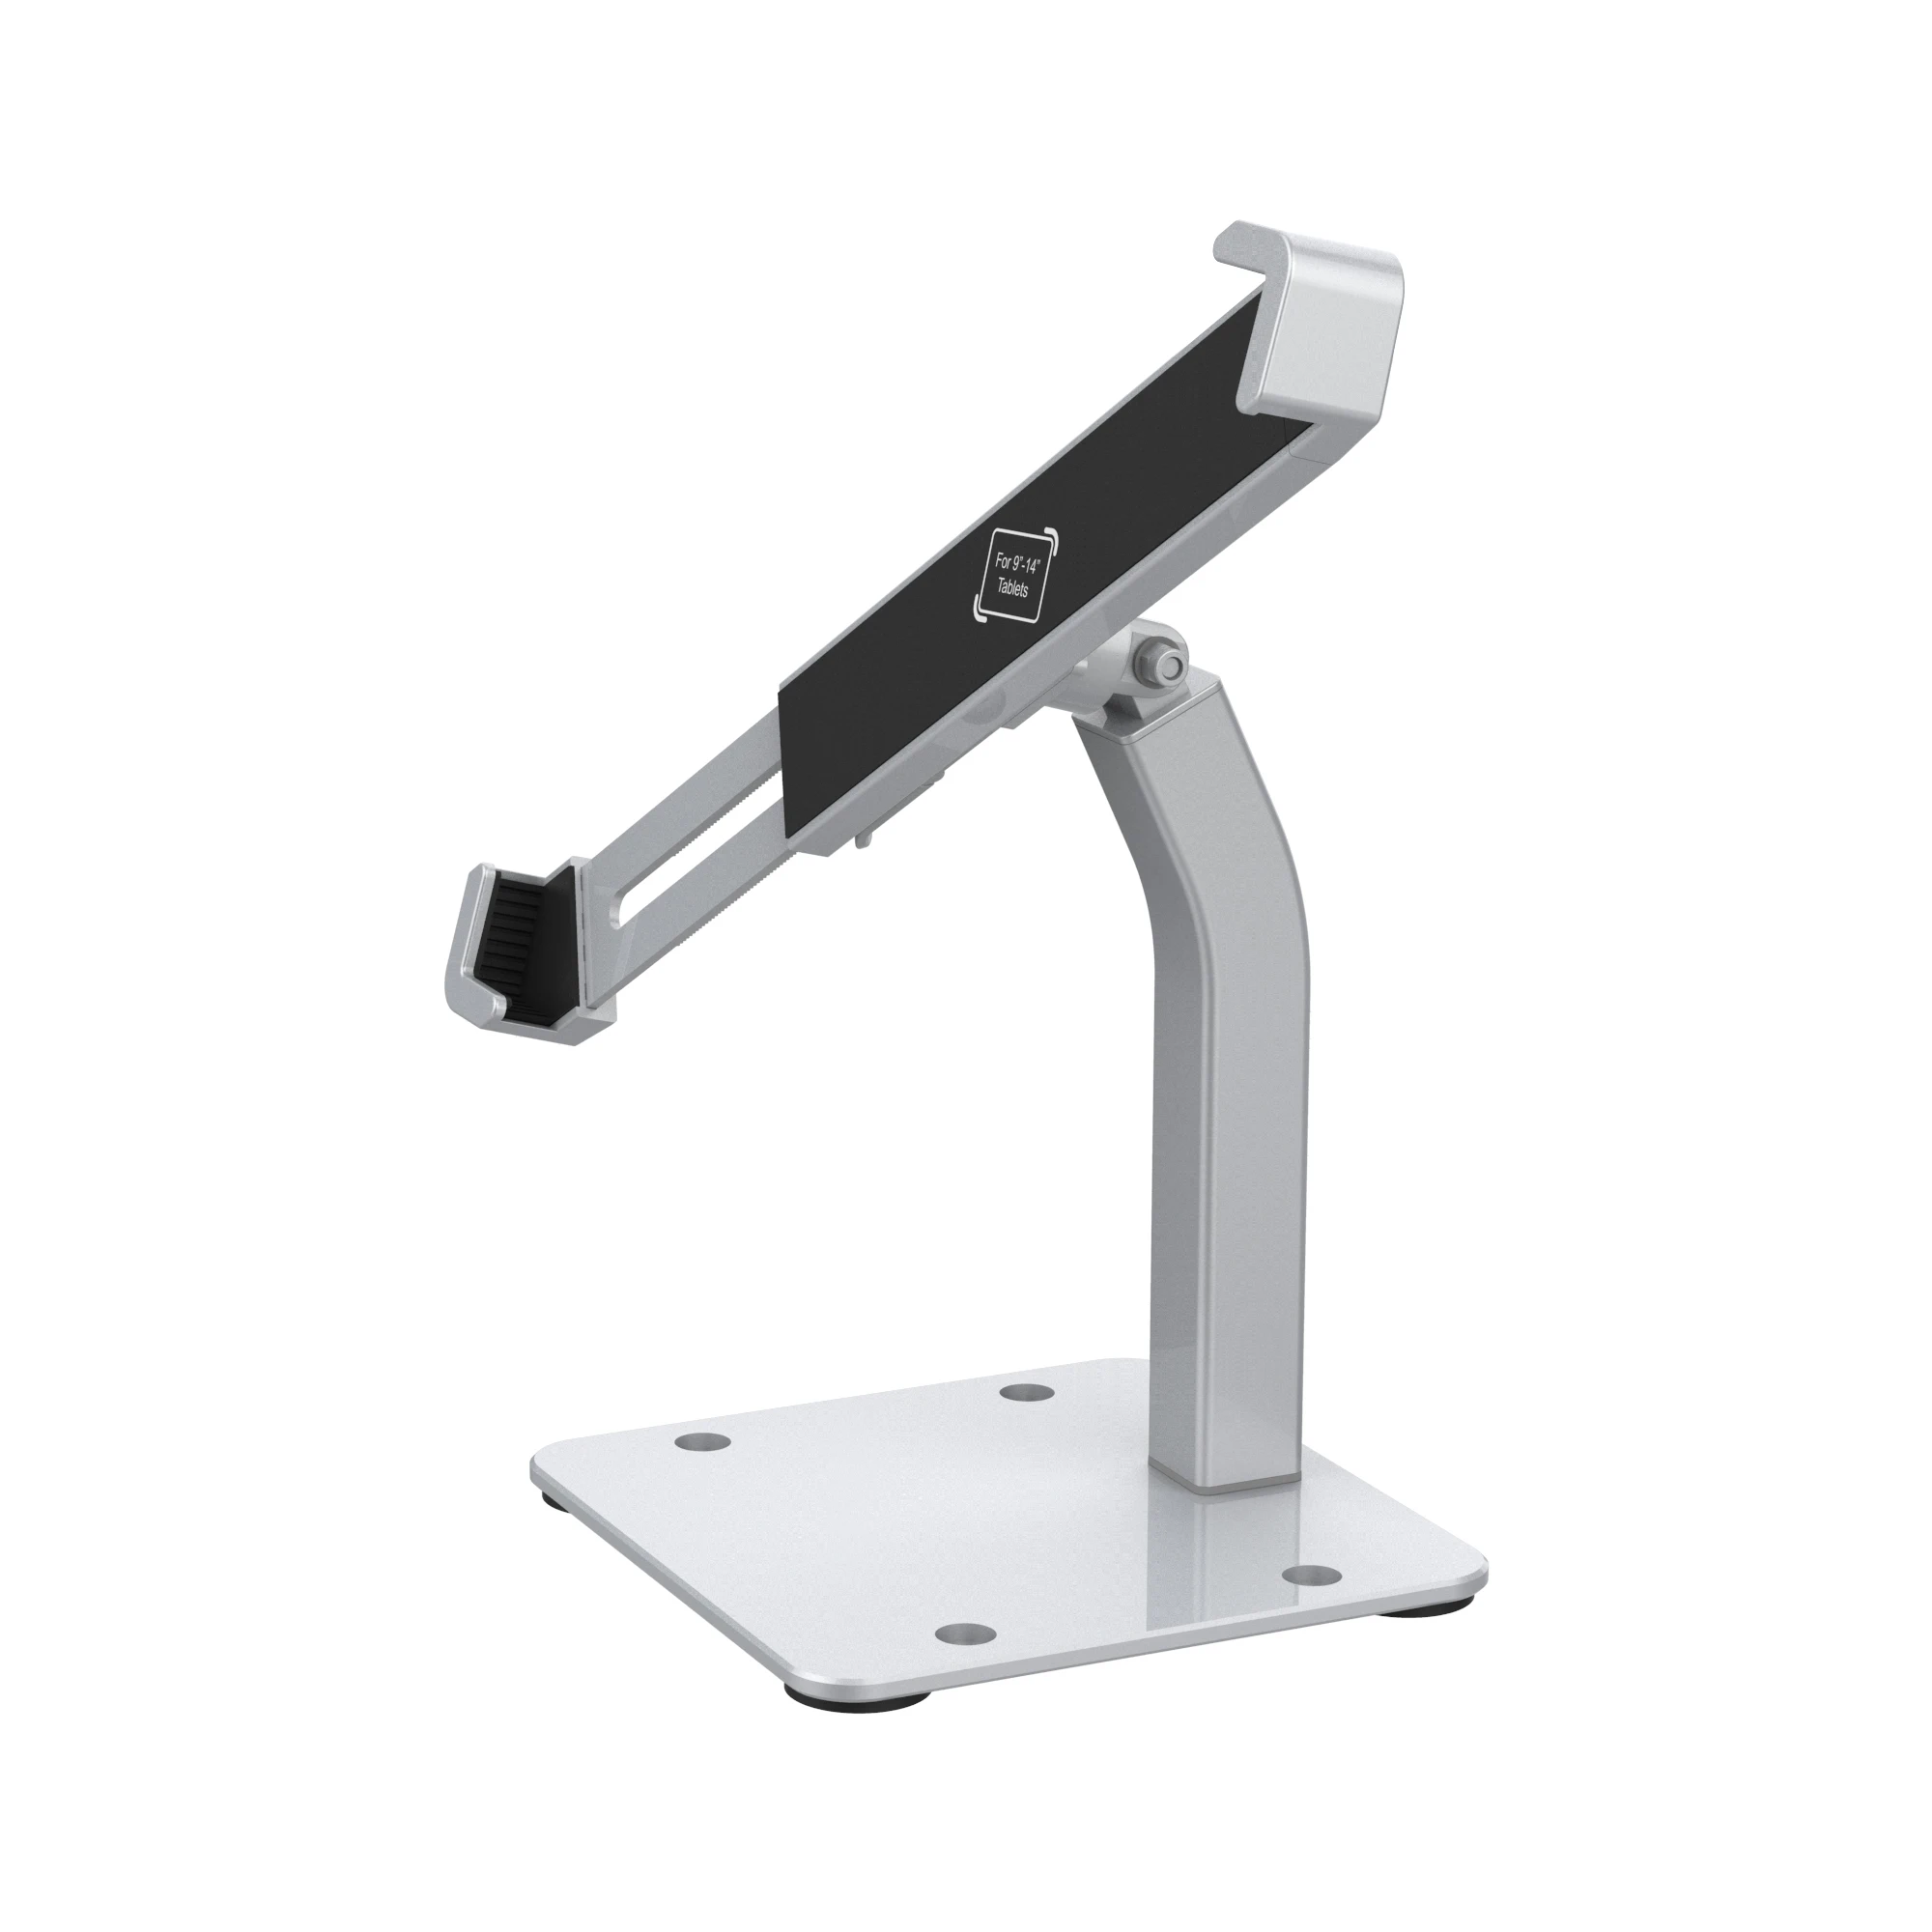 

Tablet Mount Desk Tablet Stand Anti Theft Aluminium Alloy with Lock for 9-14" Tablet PC Silver OEM Desktop Stand 9 - 14 Inch 4KG